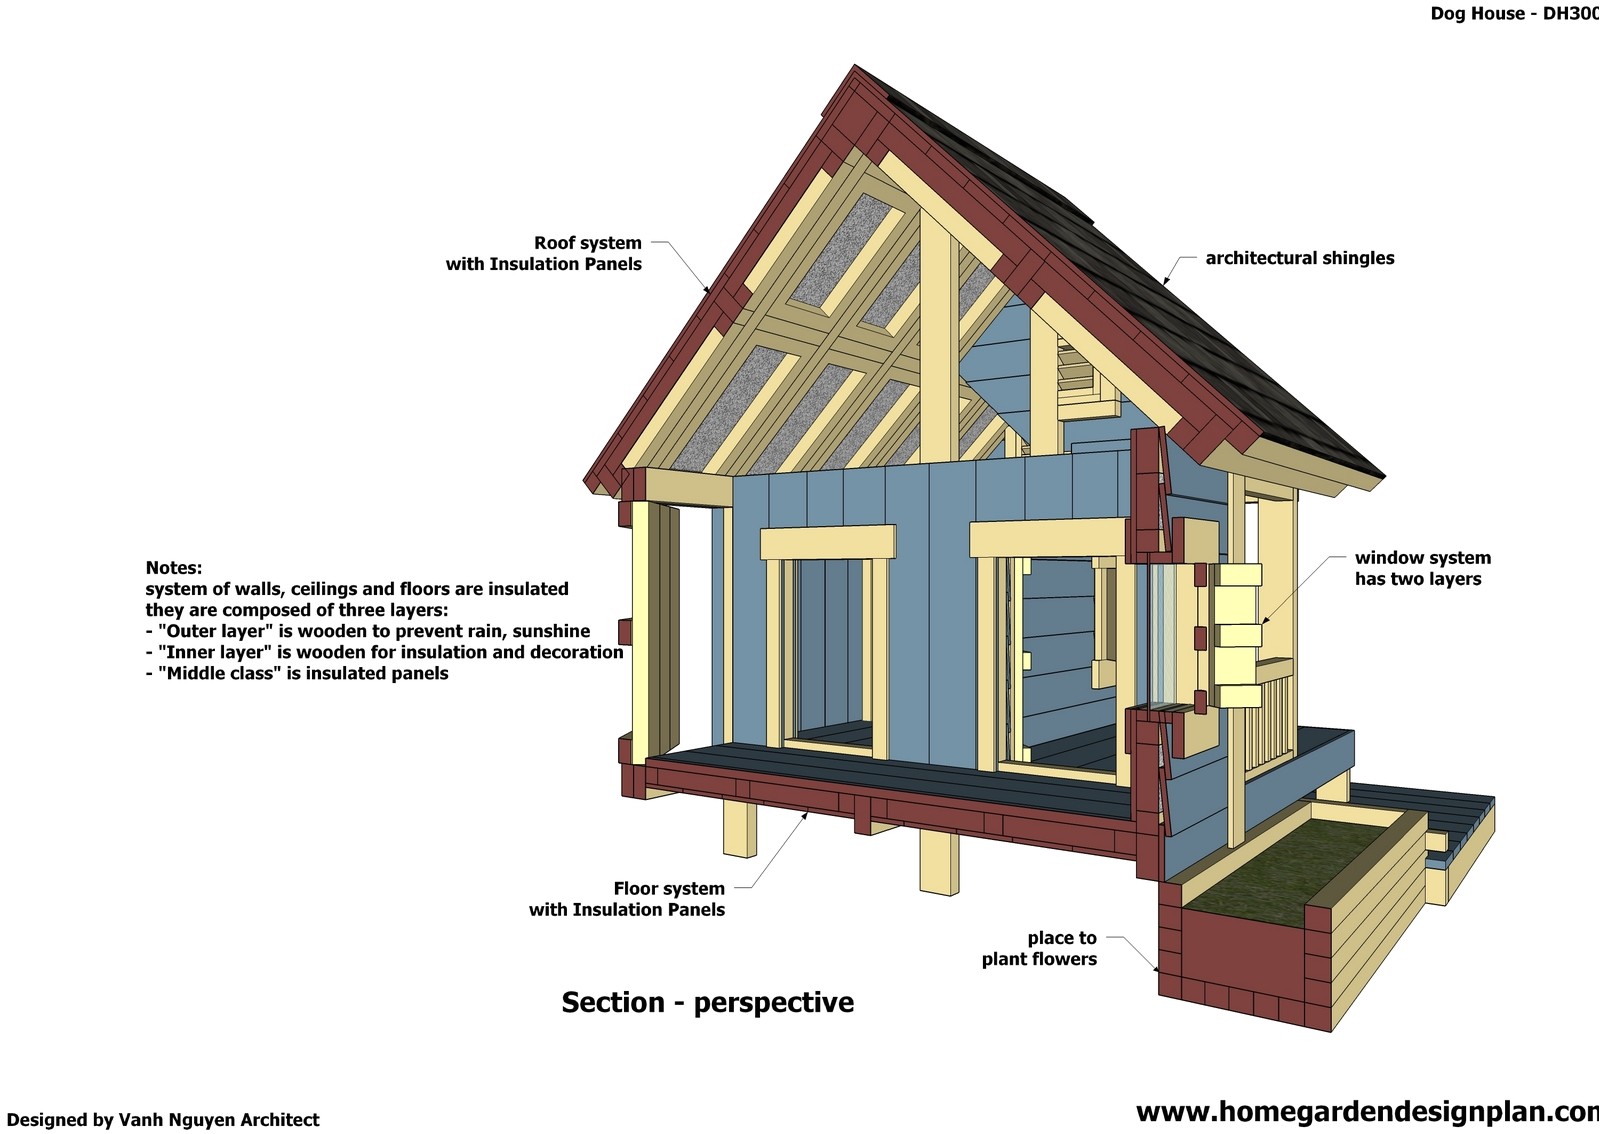 2 dog house plans free wooden plans